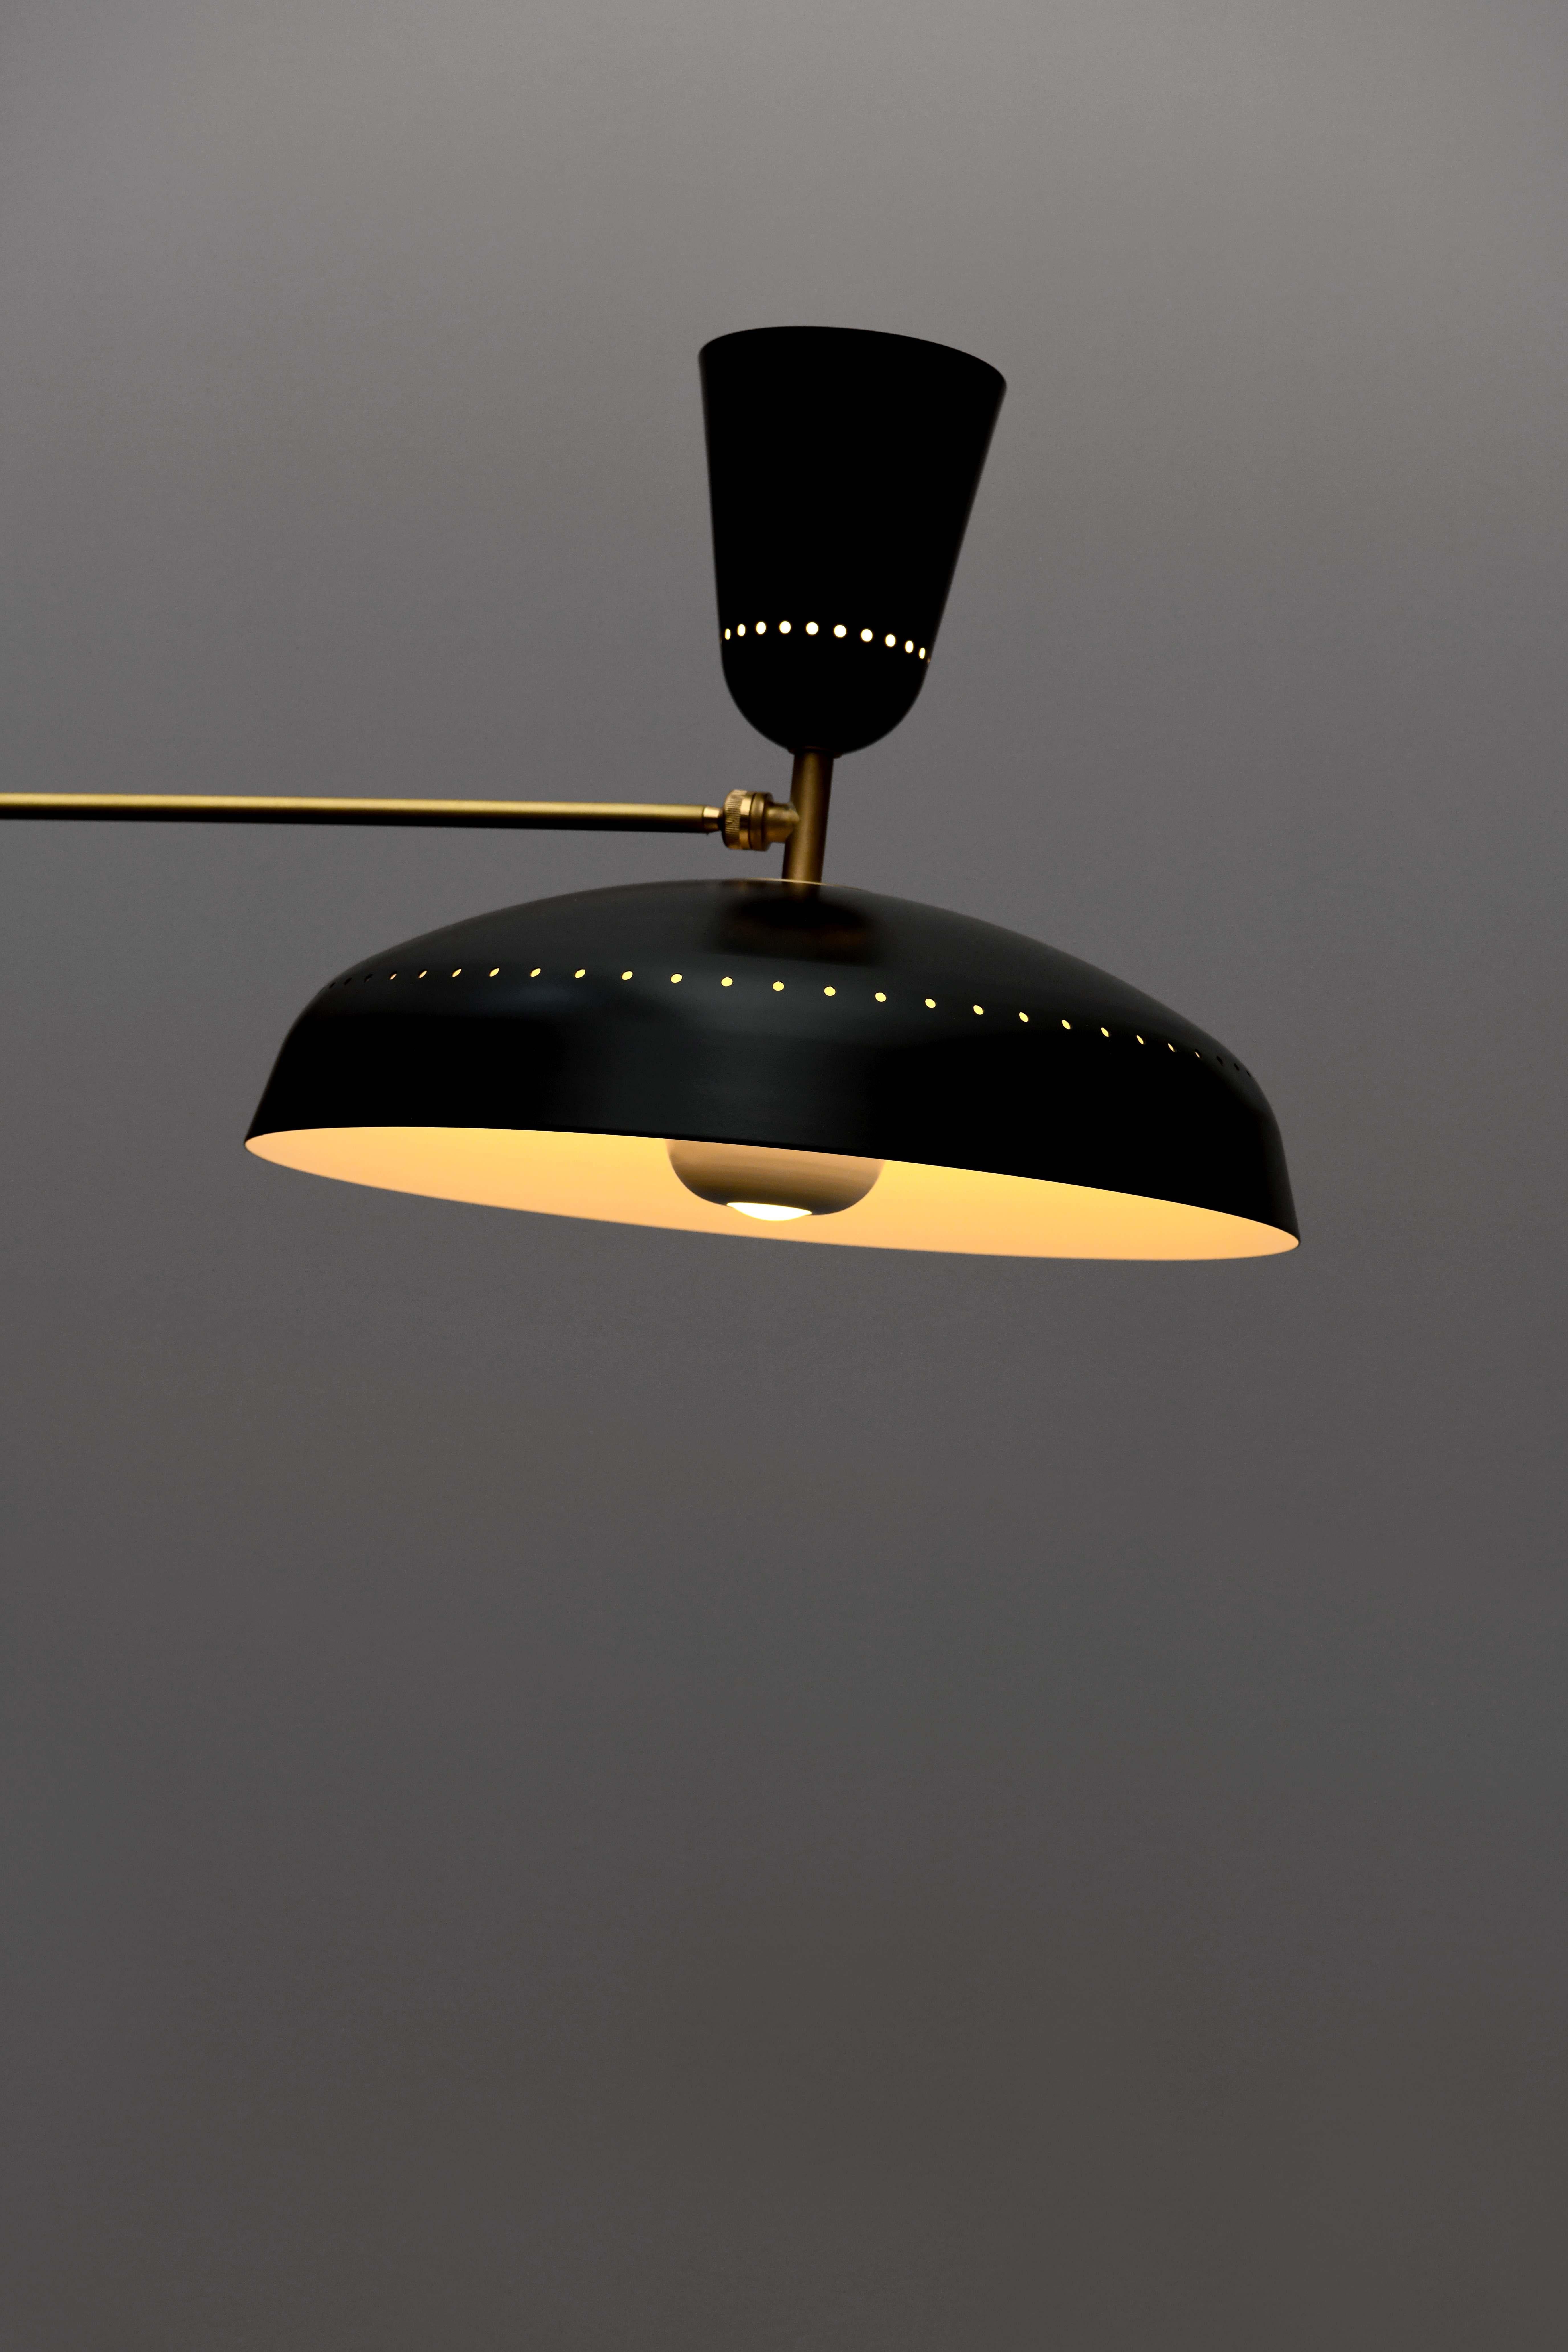 Large Pierre Guariche 'G1' suspension lamp for Sammode Studio in black. Originally designed by Pierre Guariche in 1951, this monumental suspension lamp is newly produced in an authorized re-edition by Sammode Studio in France embracing many of the